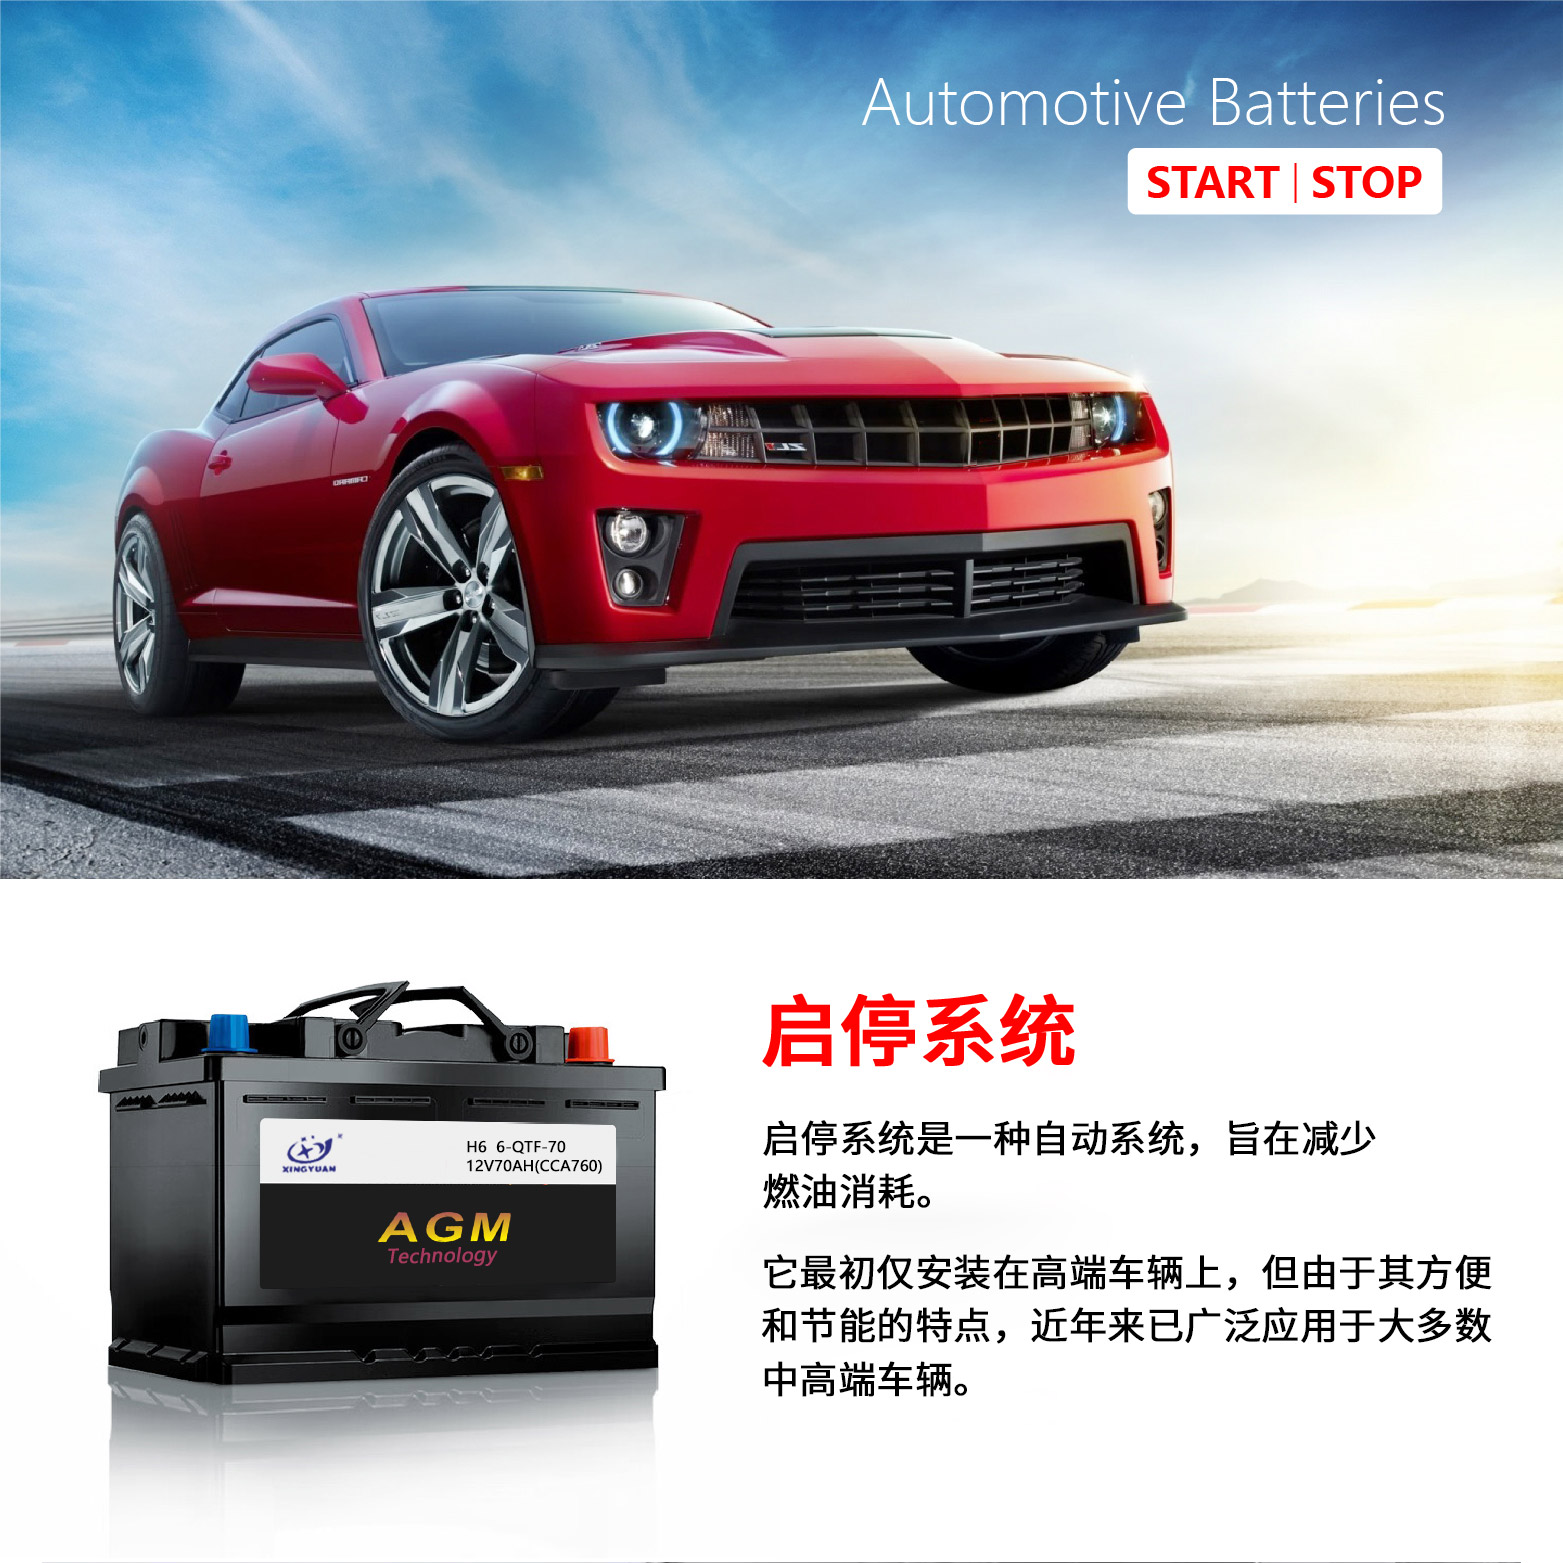 Agm Battery 6-QTF-92 Start Stop 12V Maintenance-free Battery 850 CCA Automotive Intermediate Frequency Battery for Vehicles